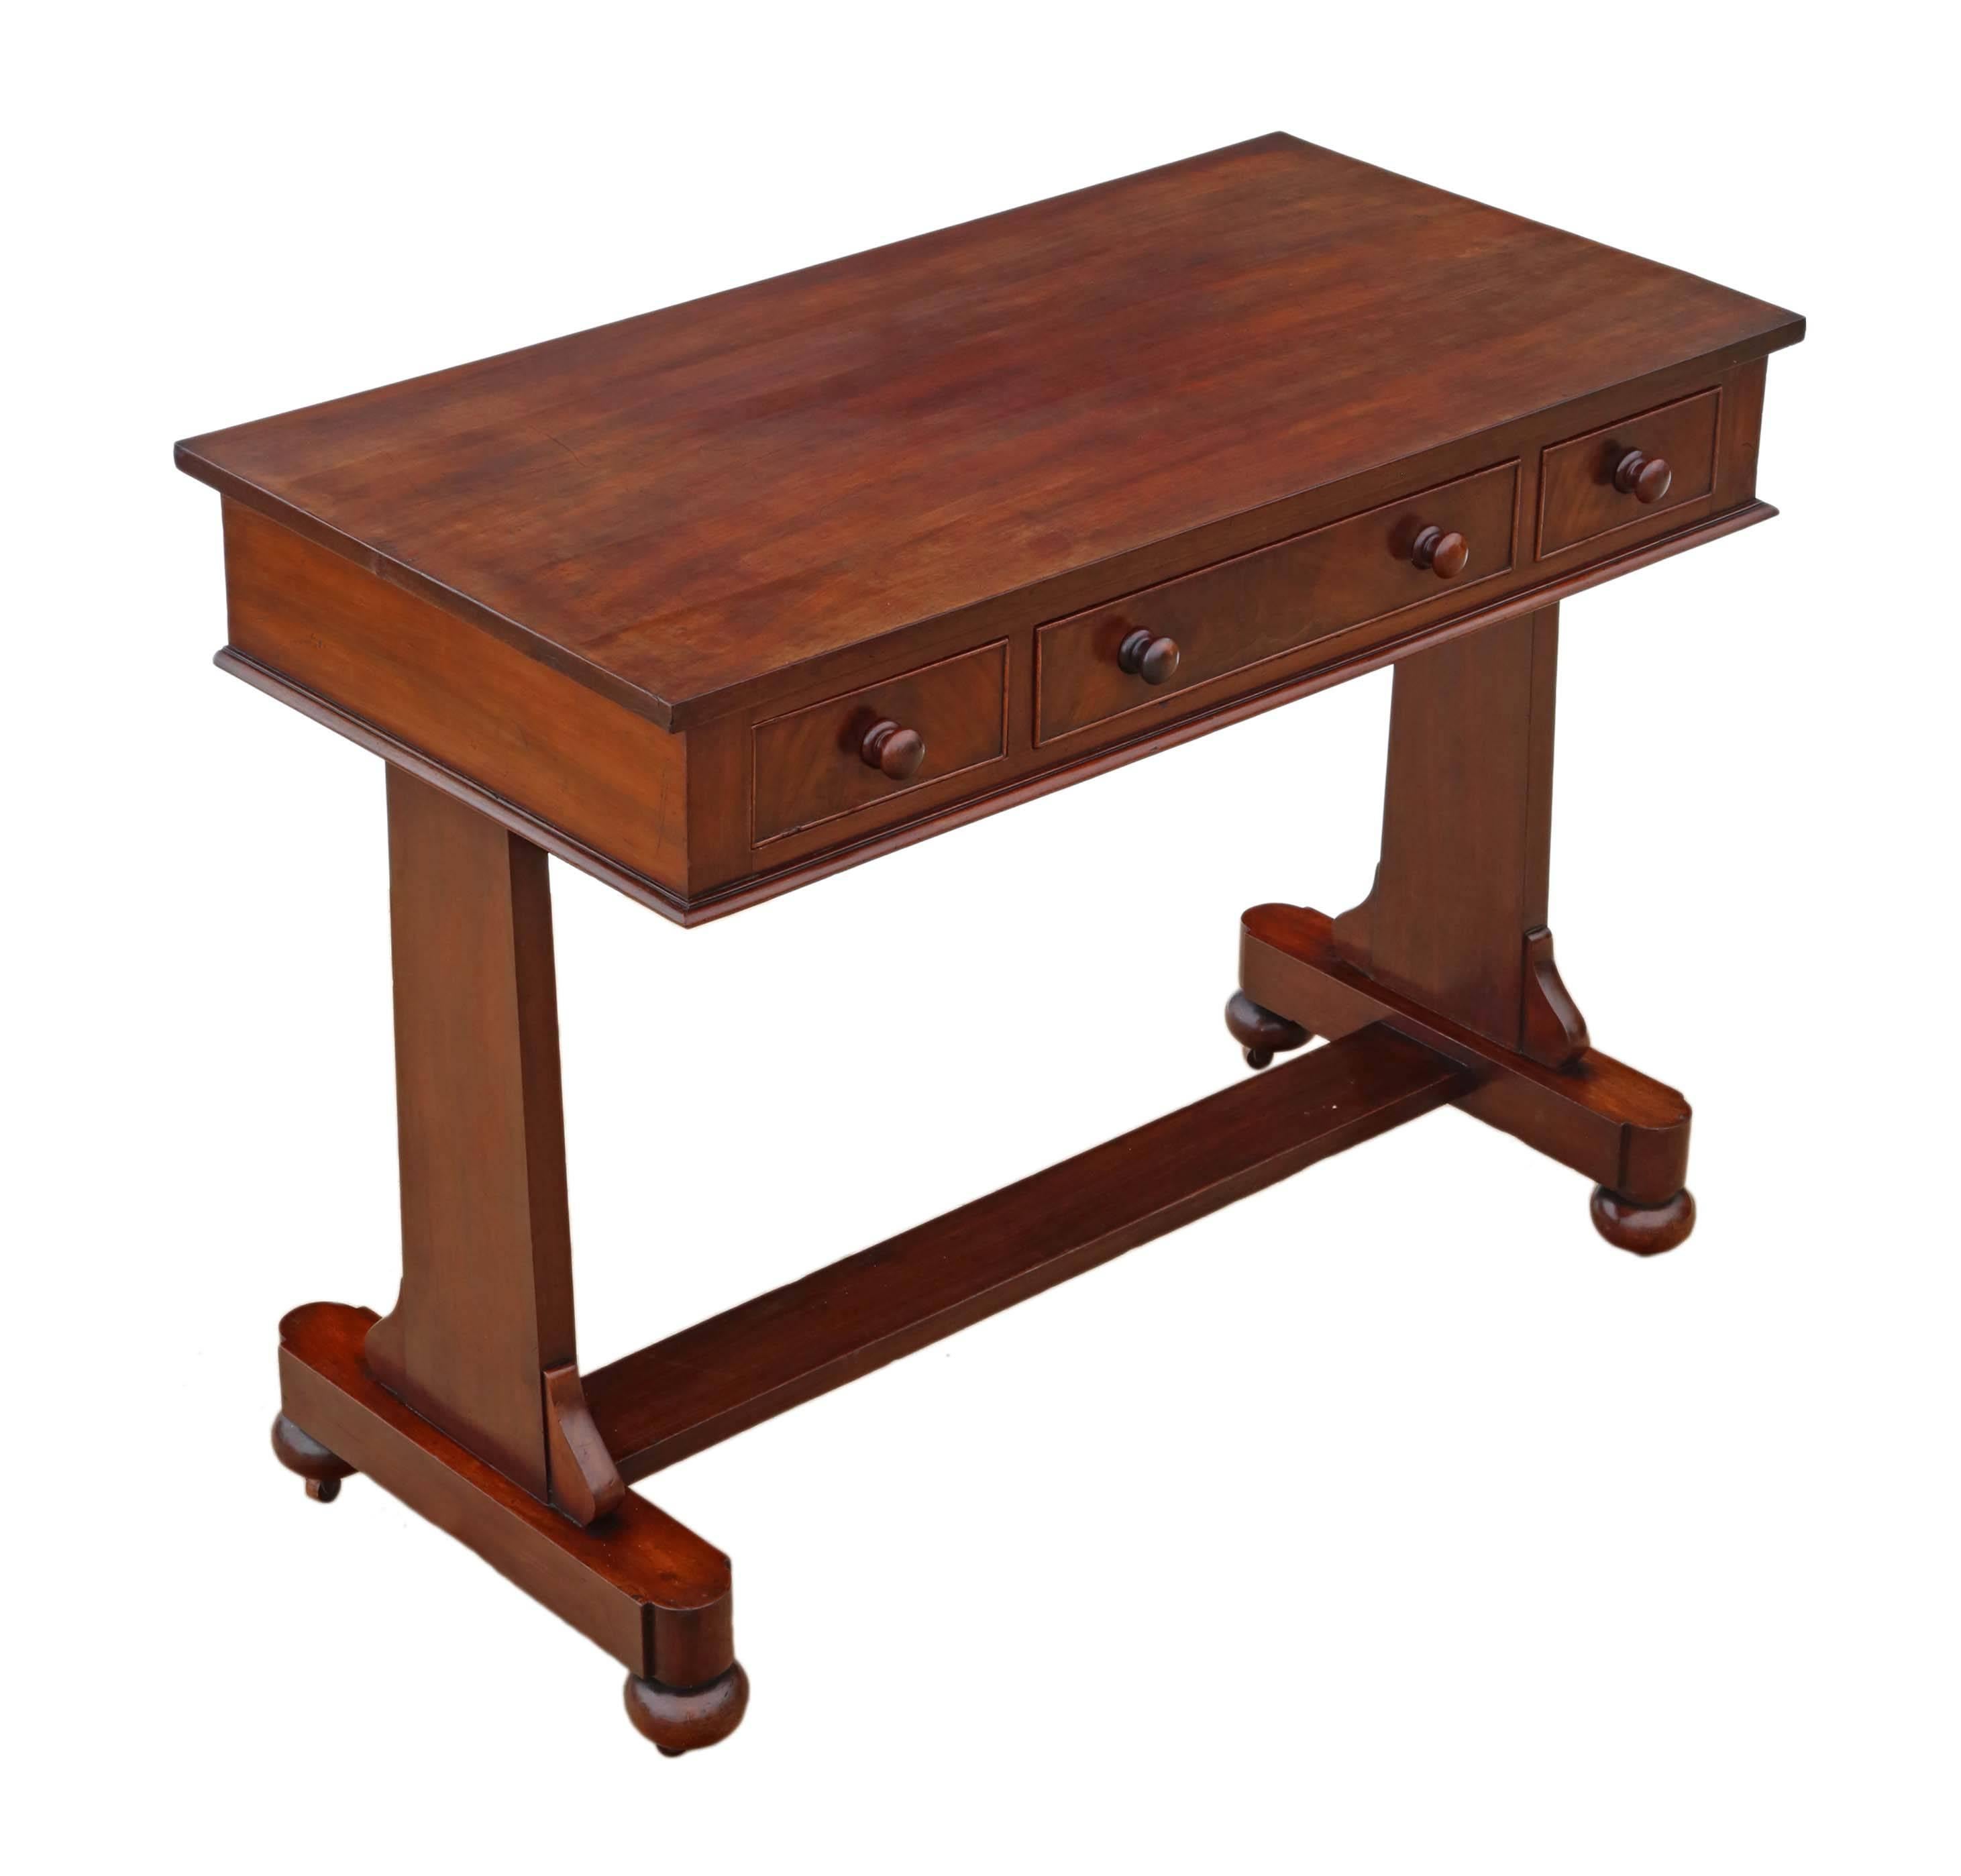 Mid-19th Century Antique Quality Victorian circa 1860 Mahogany Desk or Writing Table For Sale